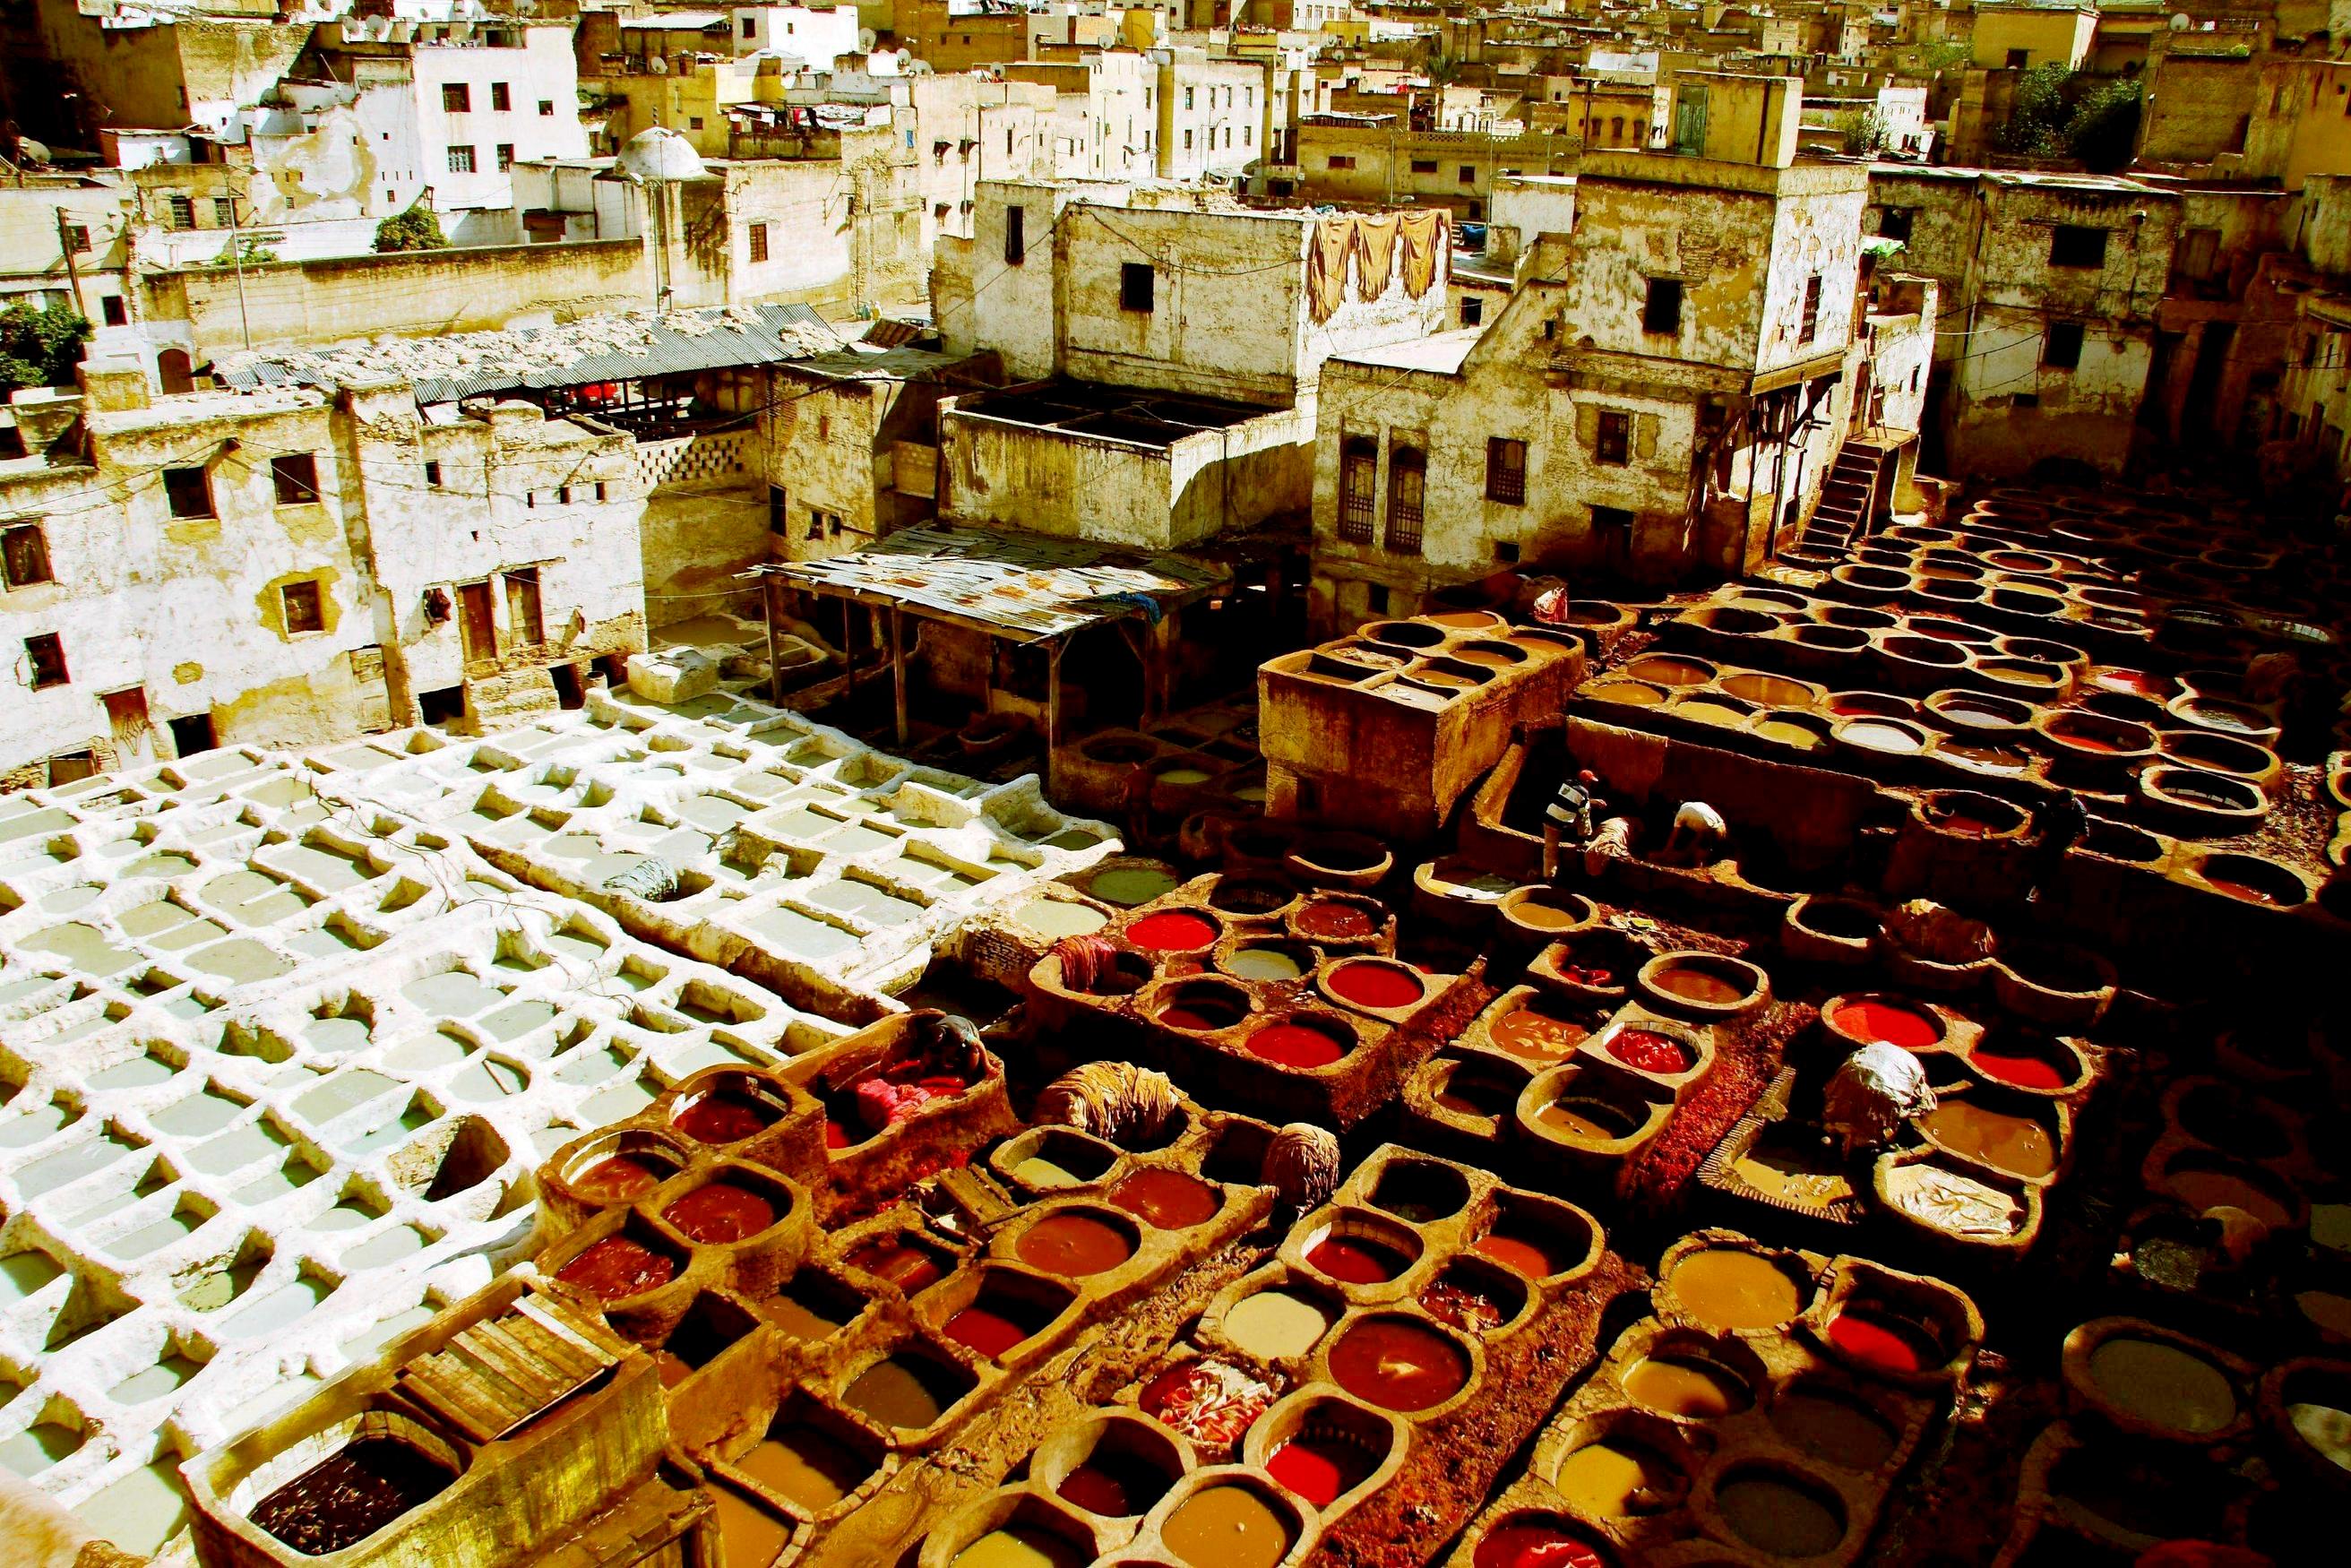 10 days Morocco New Year tour from Marrakech to explore the imperial cities, Sahara desert and blue city of Chefchaouen